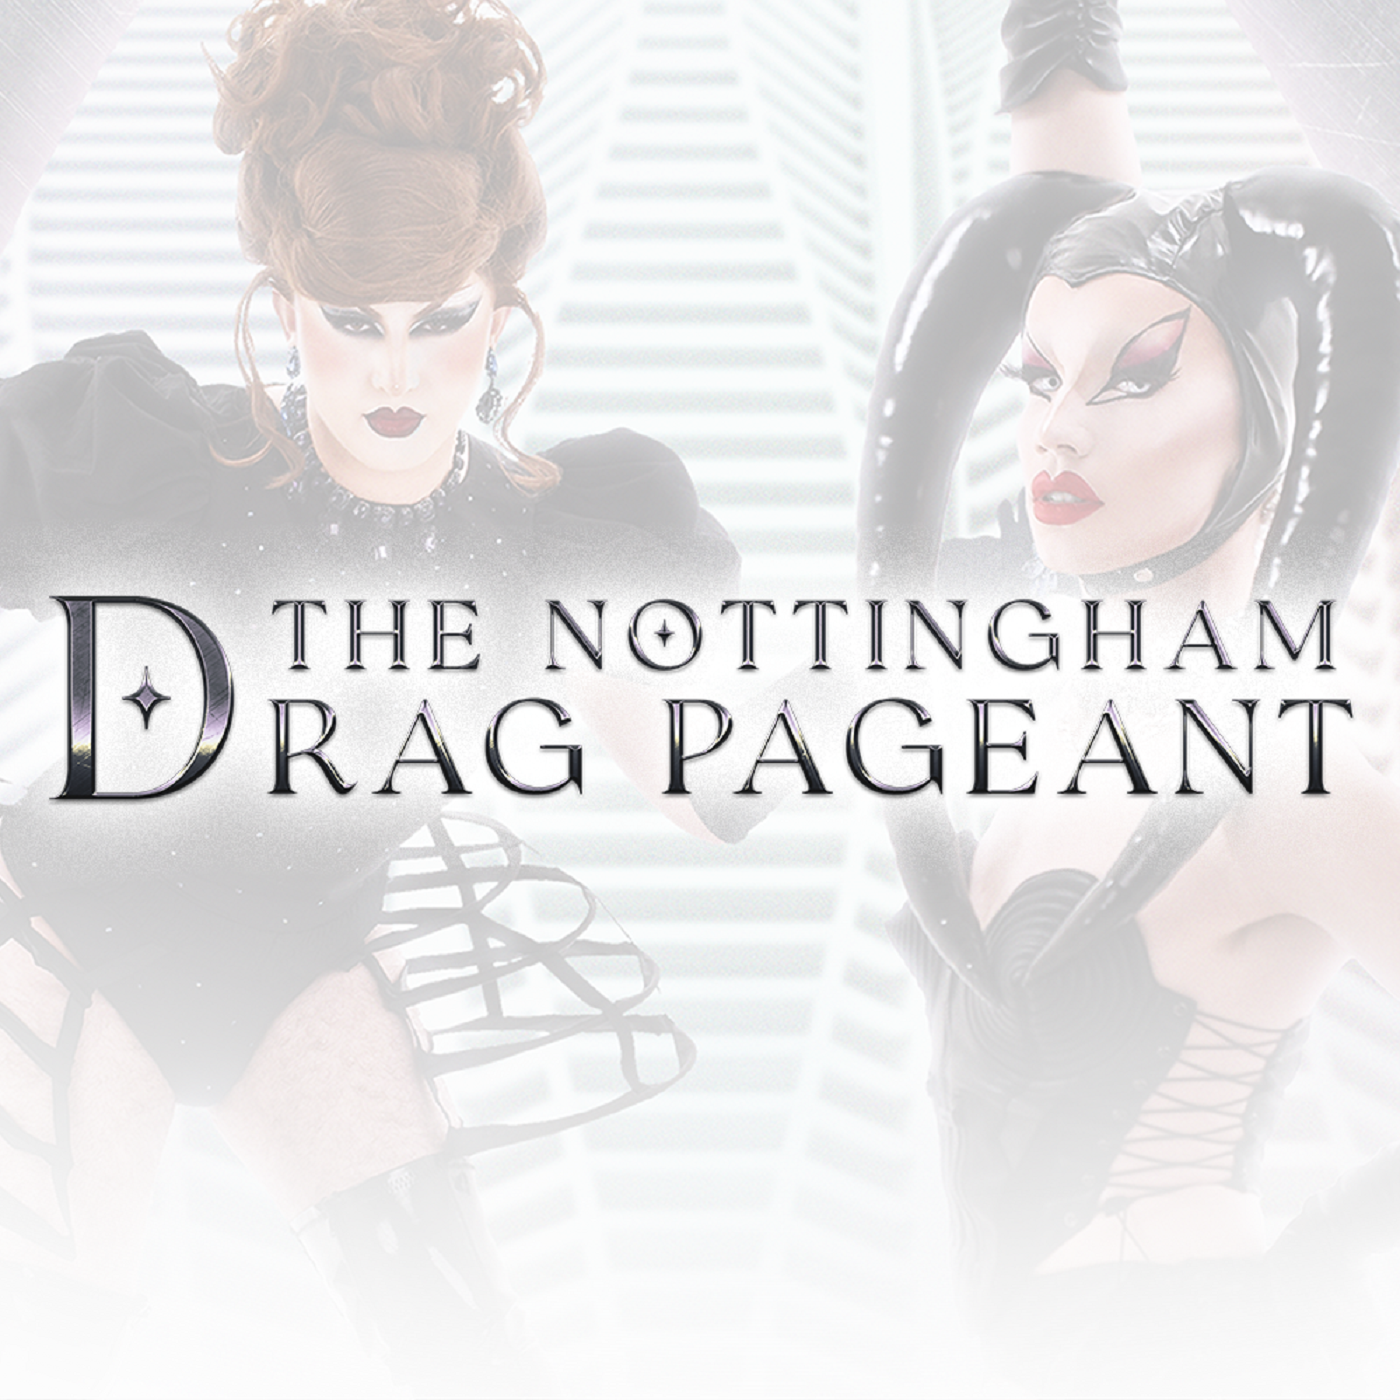 The Nottingham Drag Pageant